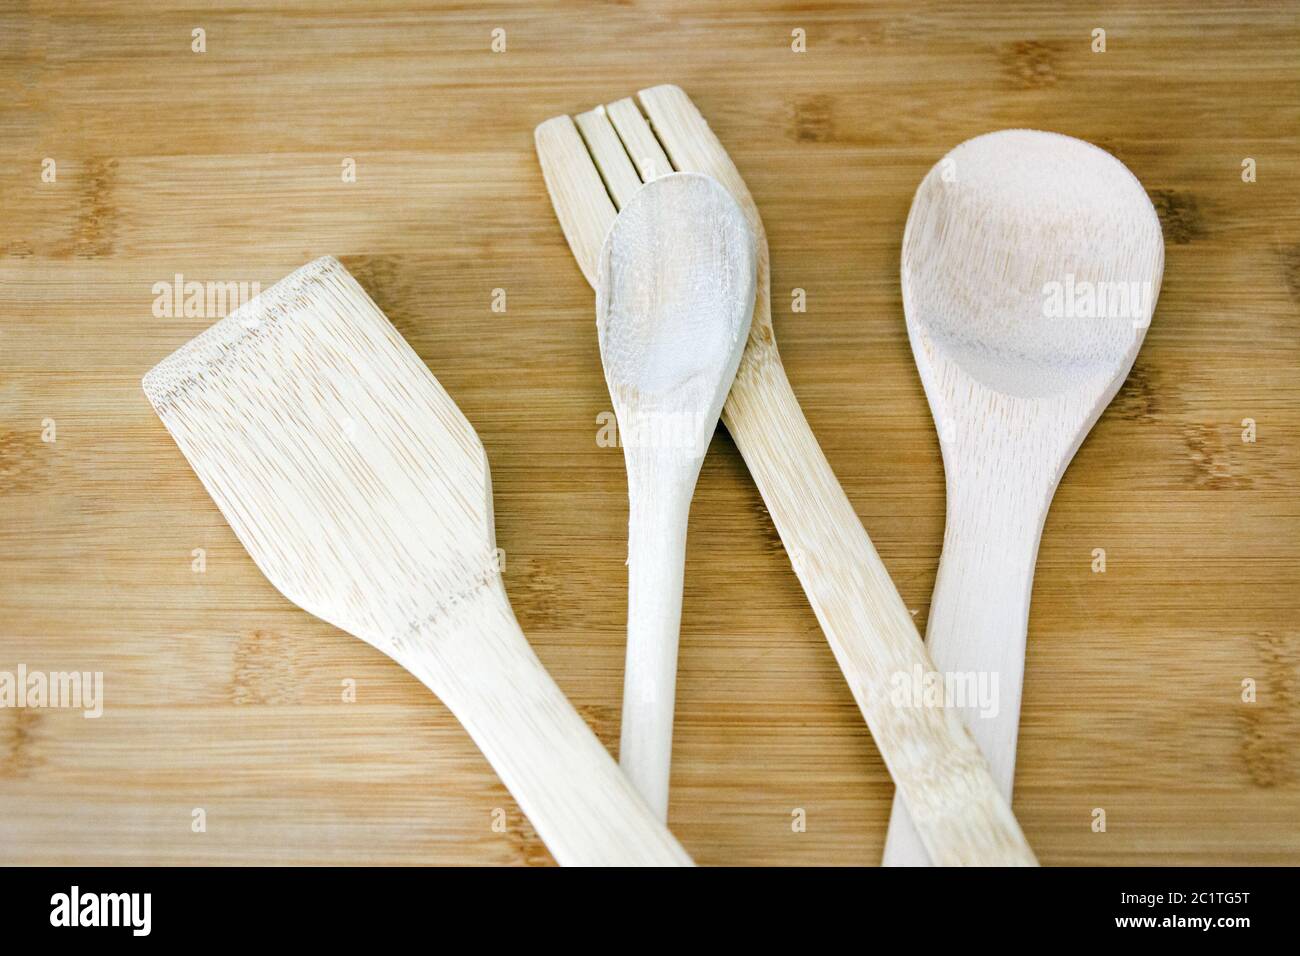 Close up of a group of wooden kitchen utensils Stock Photo